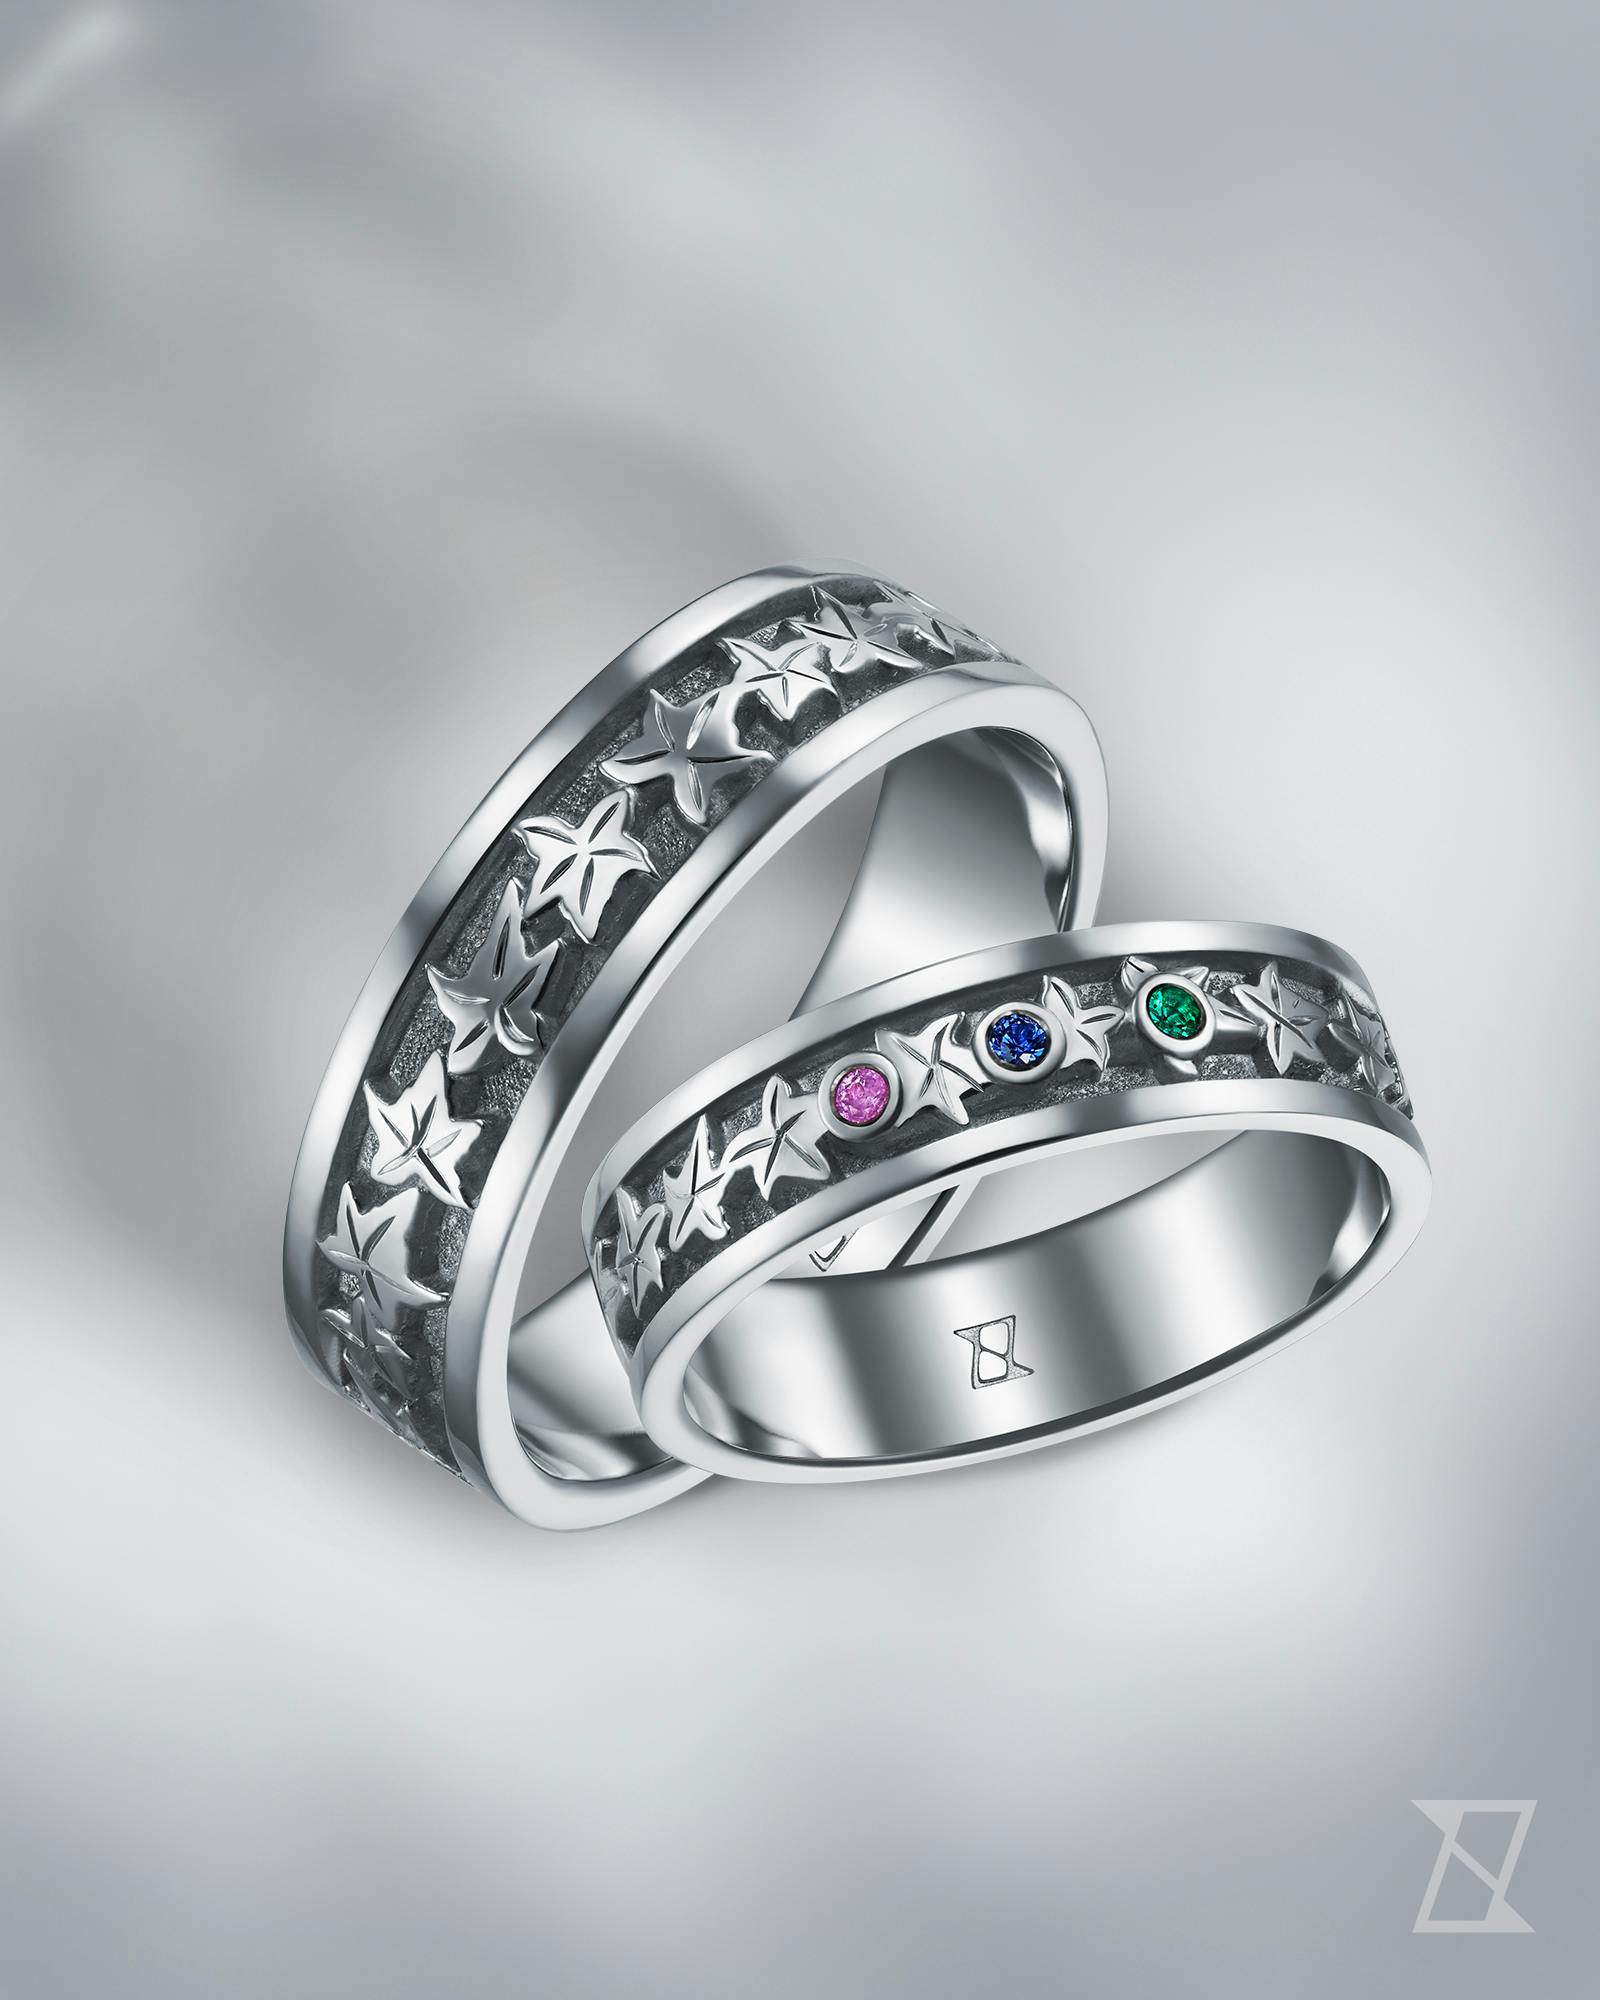 Vegetable rings with ivy motif in white gold